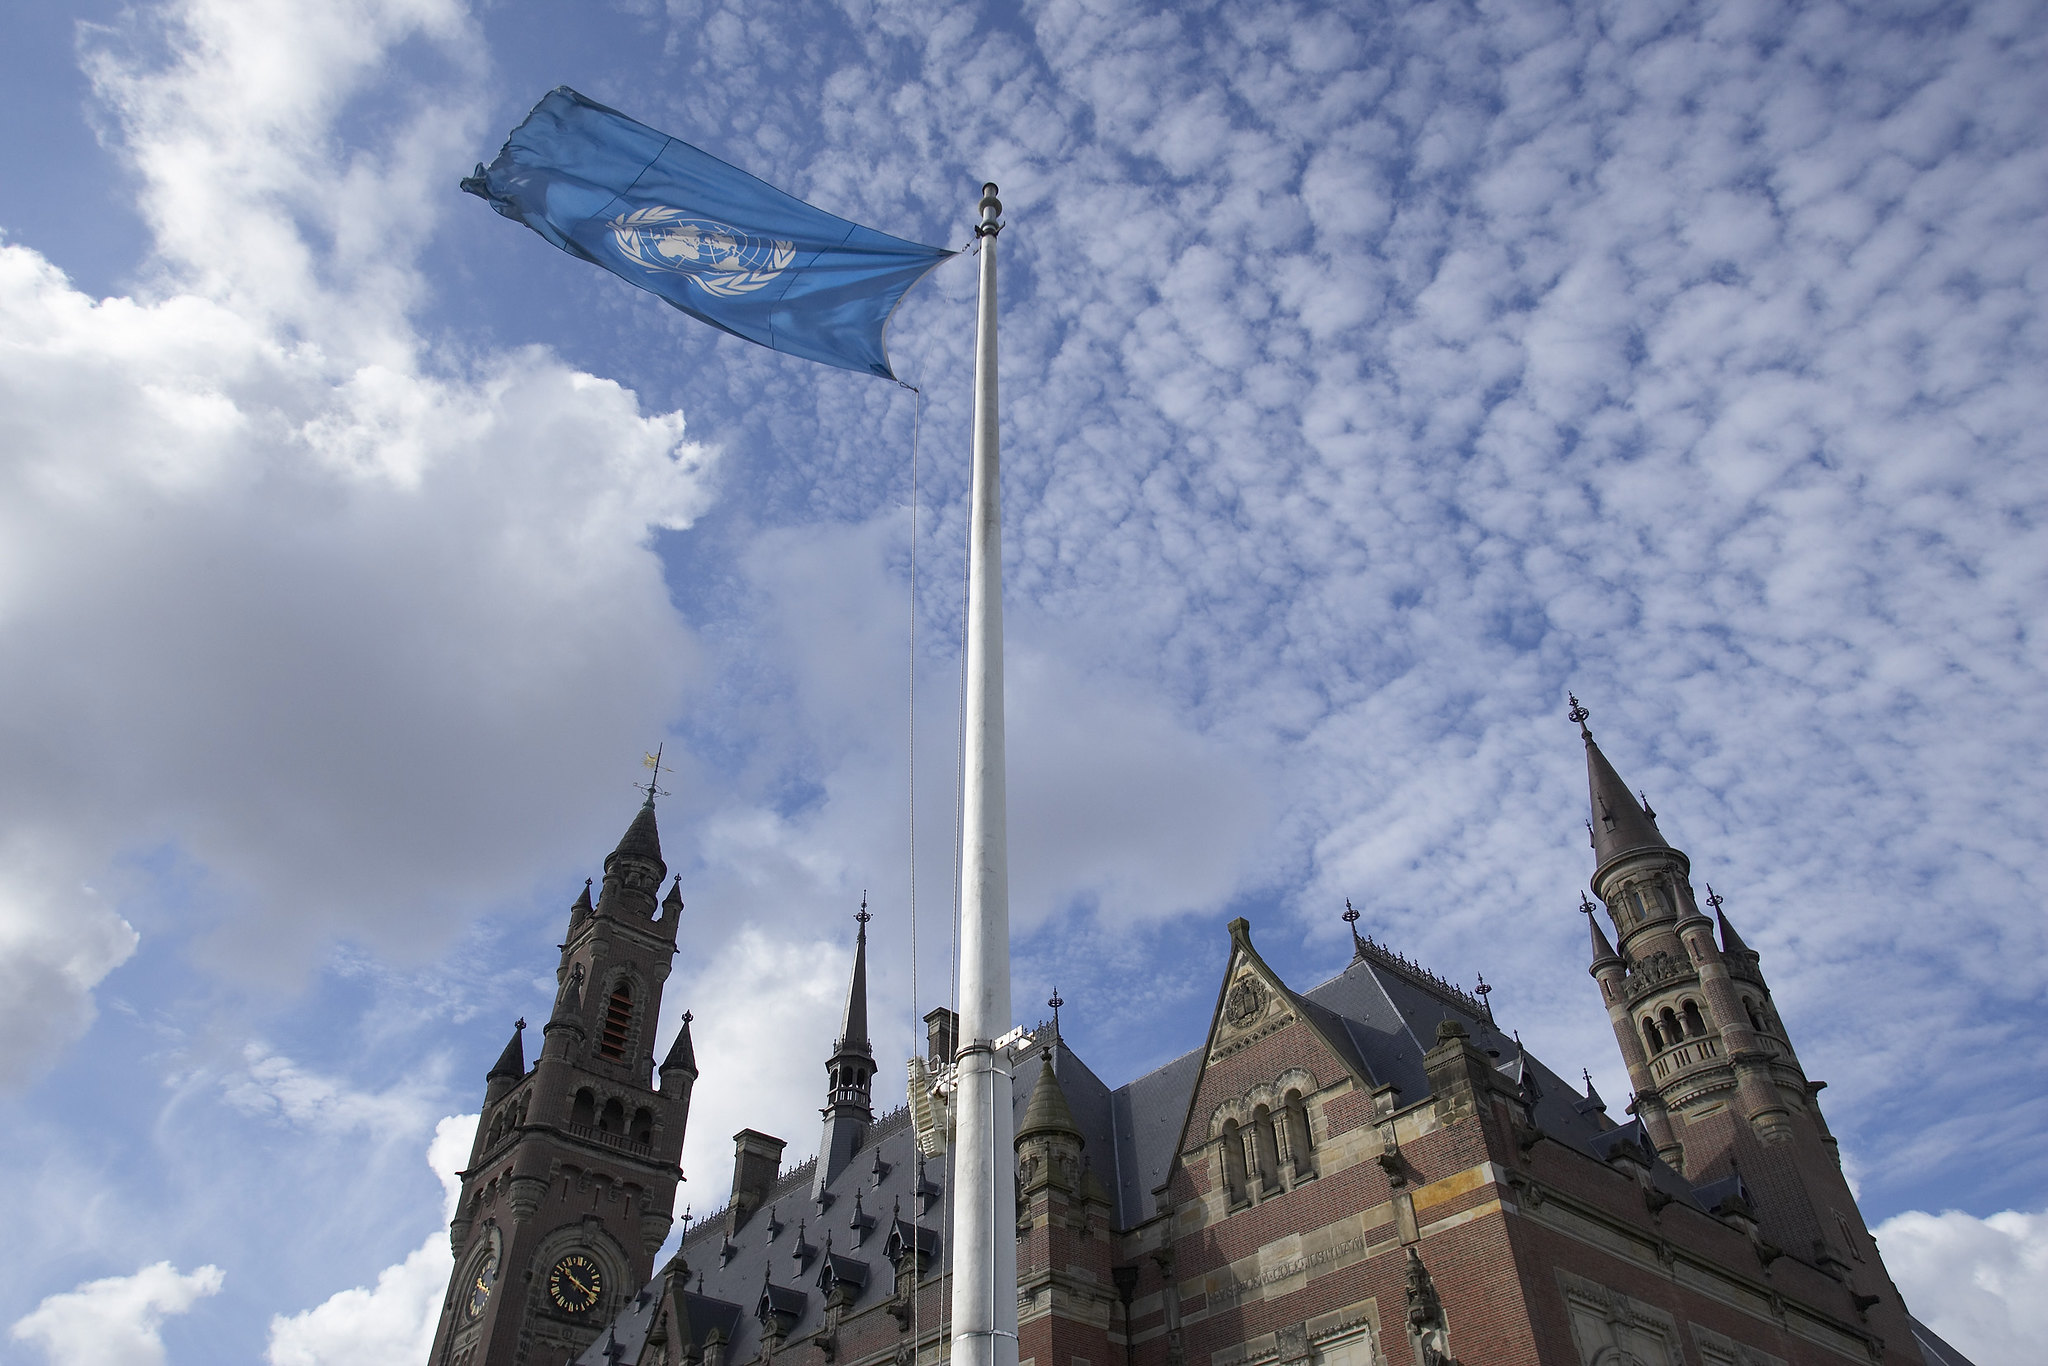 The Peace Palace, seat of the International Court of Justice, at The Hague, Netherlands, March 14, 2012. (Jeroen Bouman/UN Photo/CC BY-NC-ND 2.0 DEED)